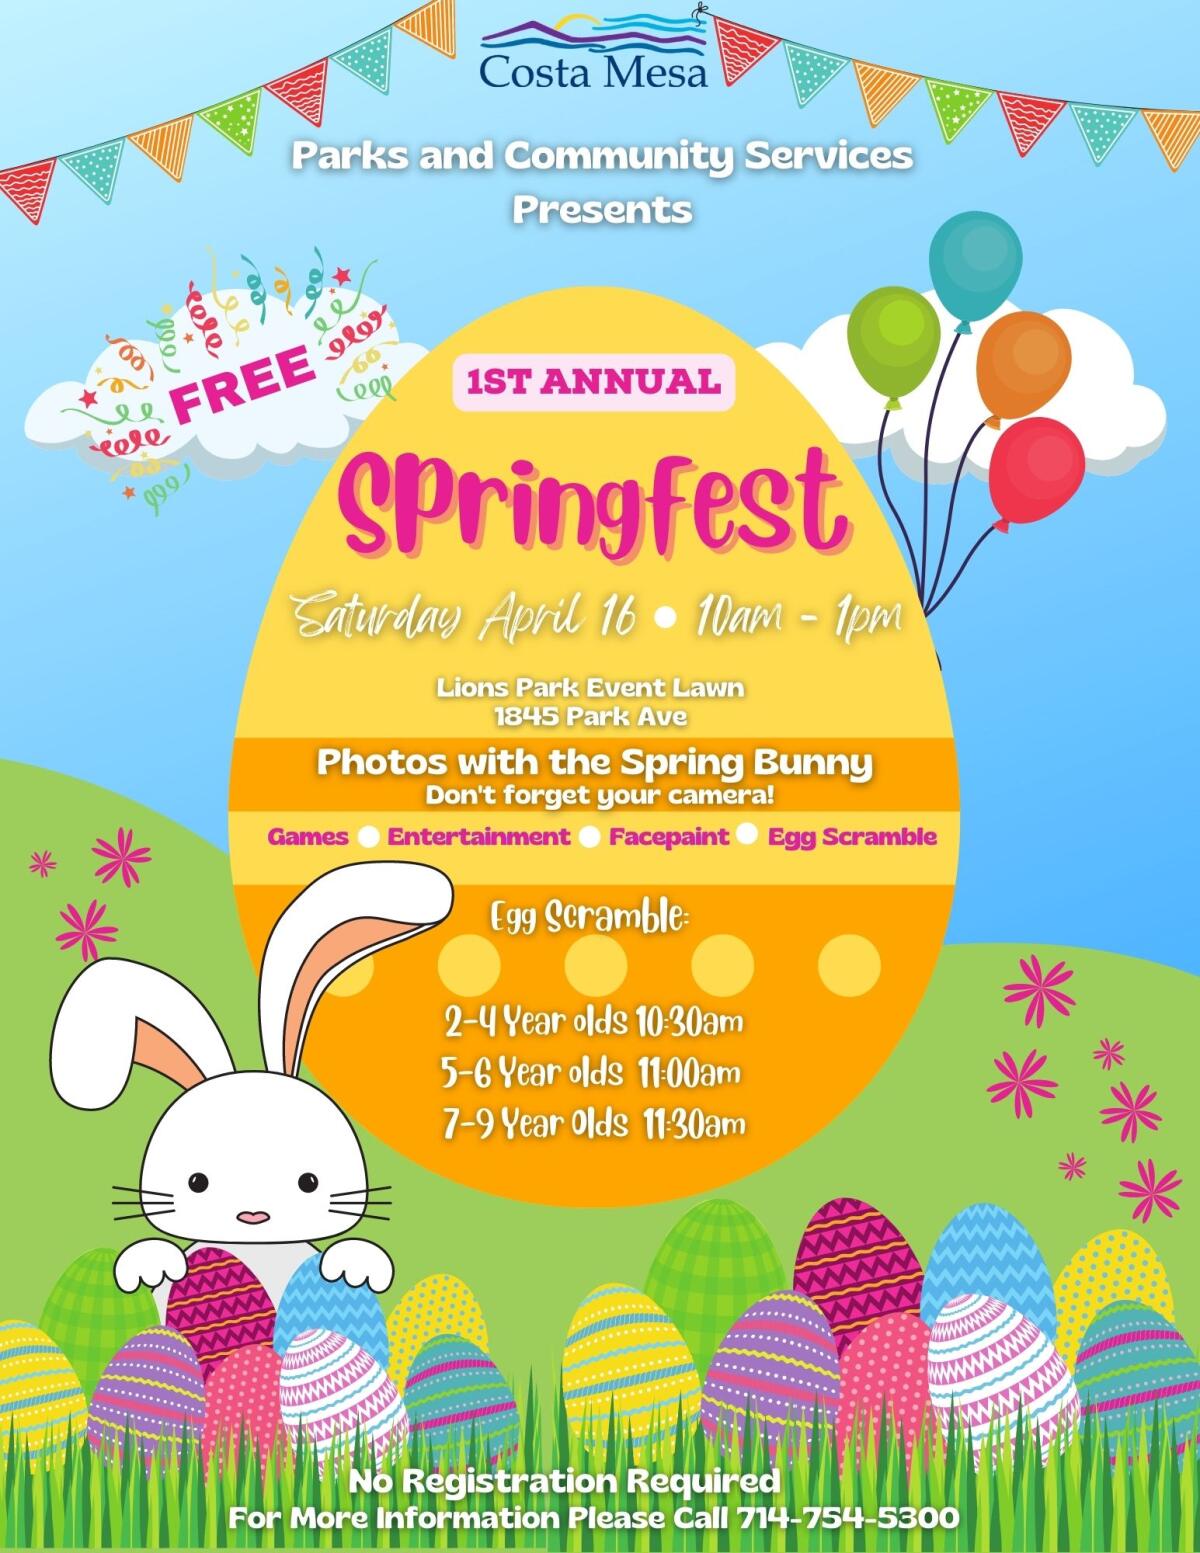 A free city-sponsored SpringFest takes place Saturday at Lions Park, from 10 a.m. to 1 p.m.